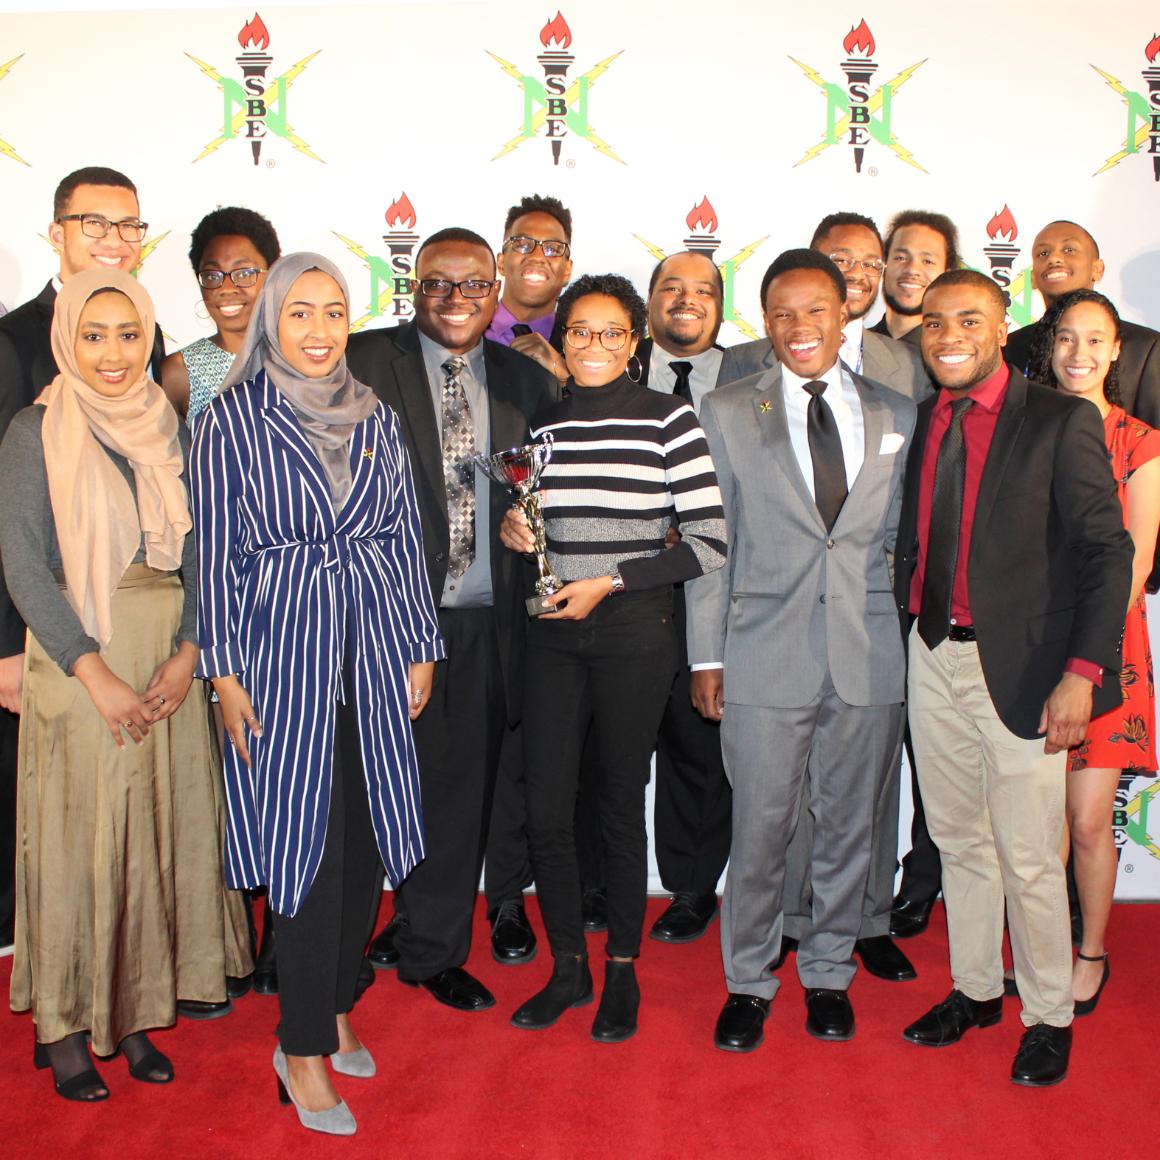 SCU NSBE students pose with their Best Small Chapter Award image link to story